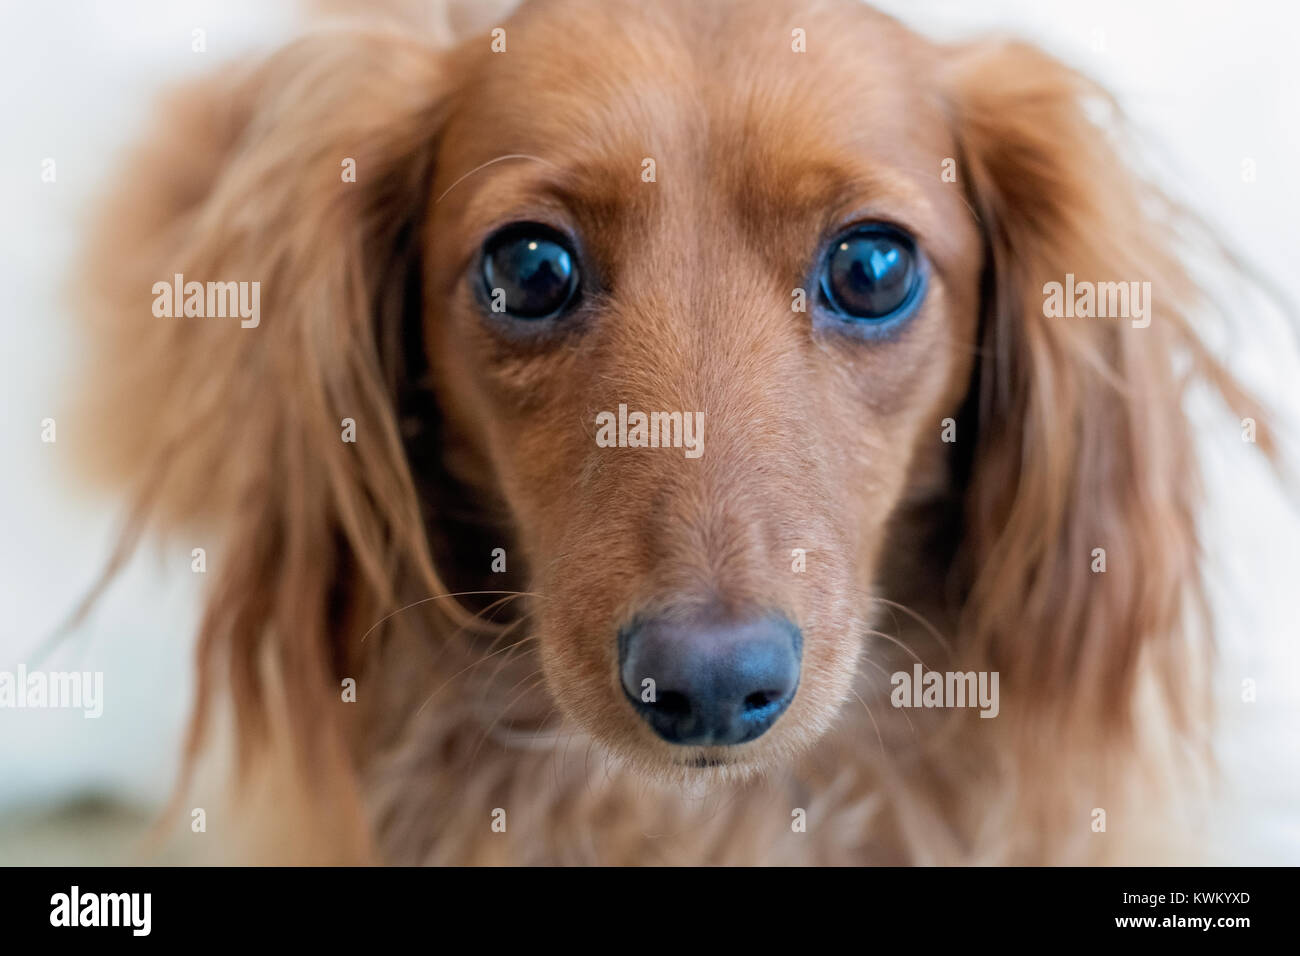 Close-up of adorable face of long-haired miniature dachshund looking directly at the camera. Stock Photo